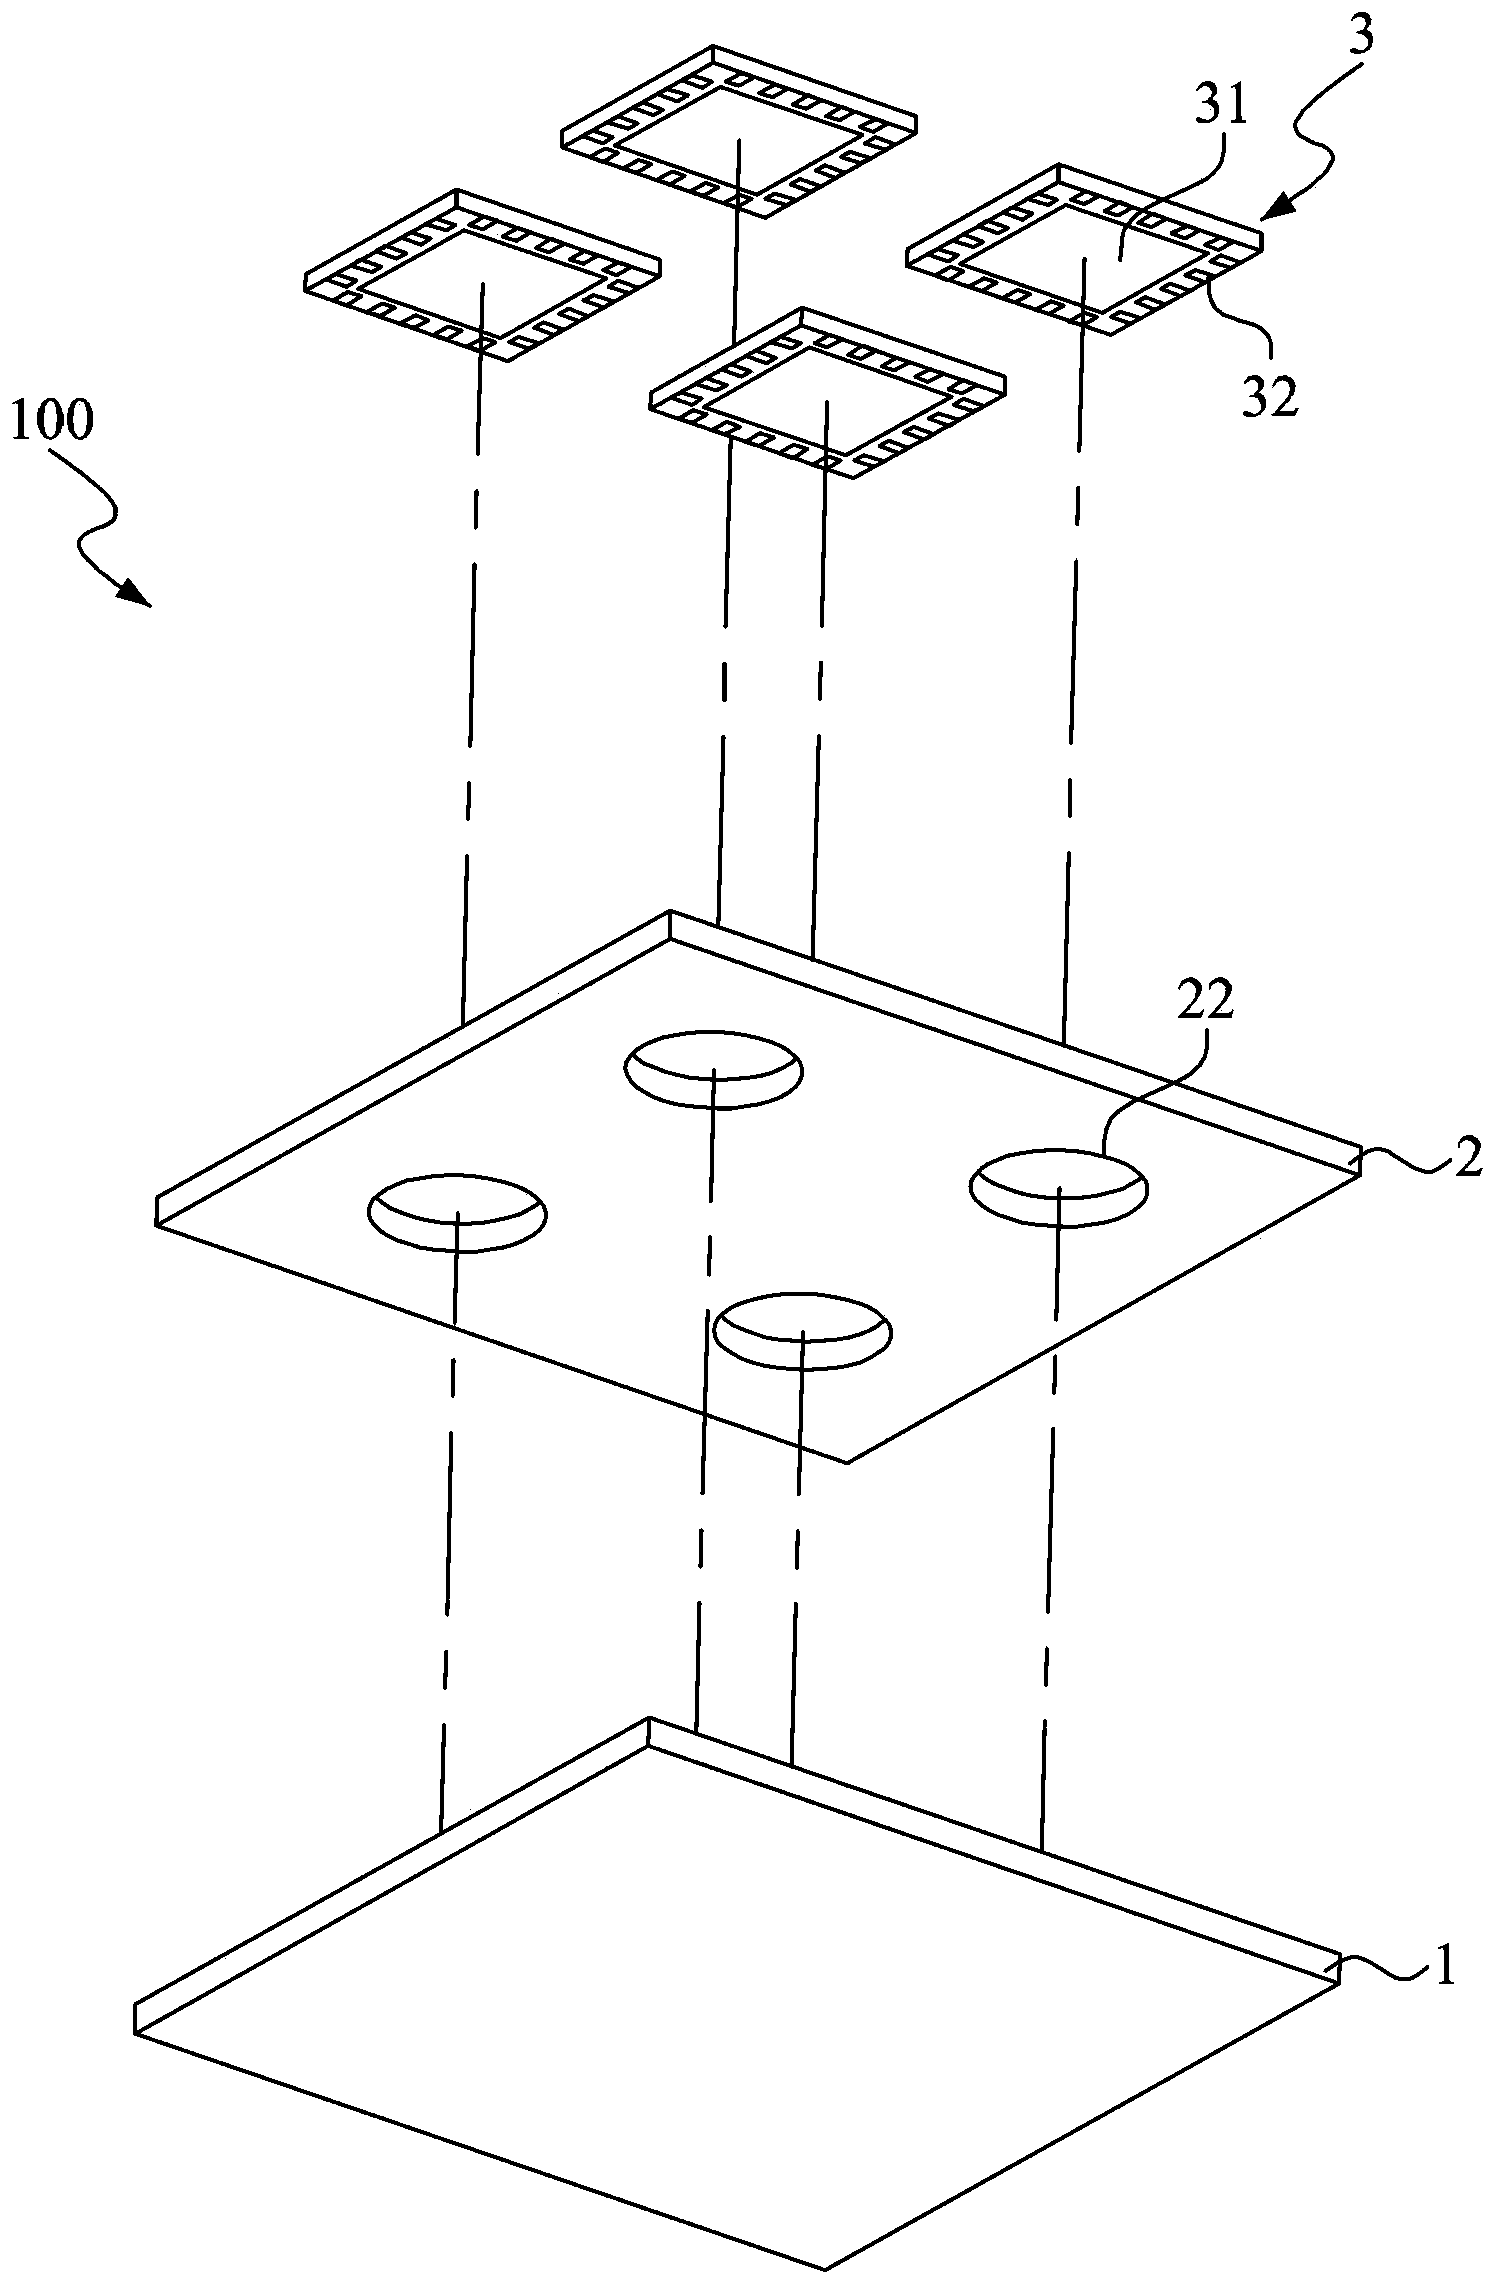 High heat conduction apparatus for multilayer circuit